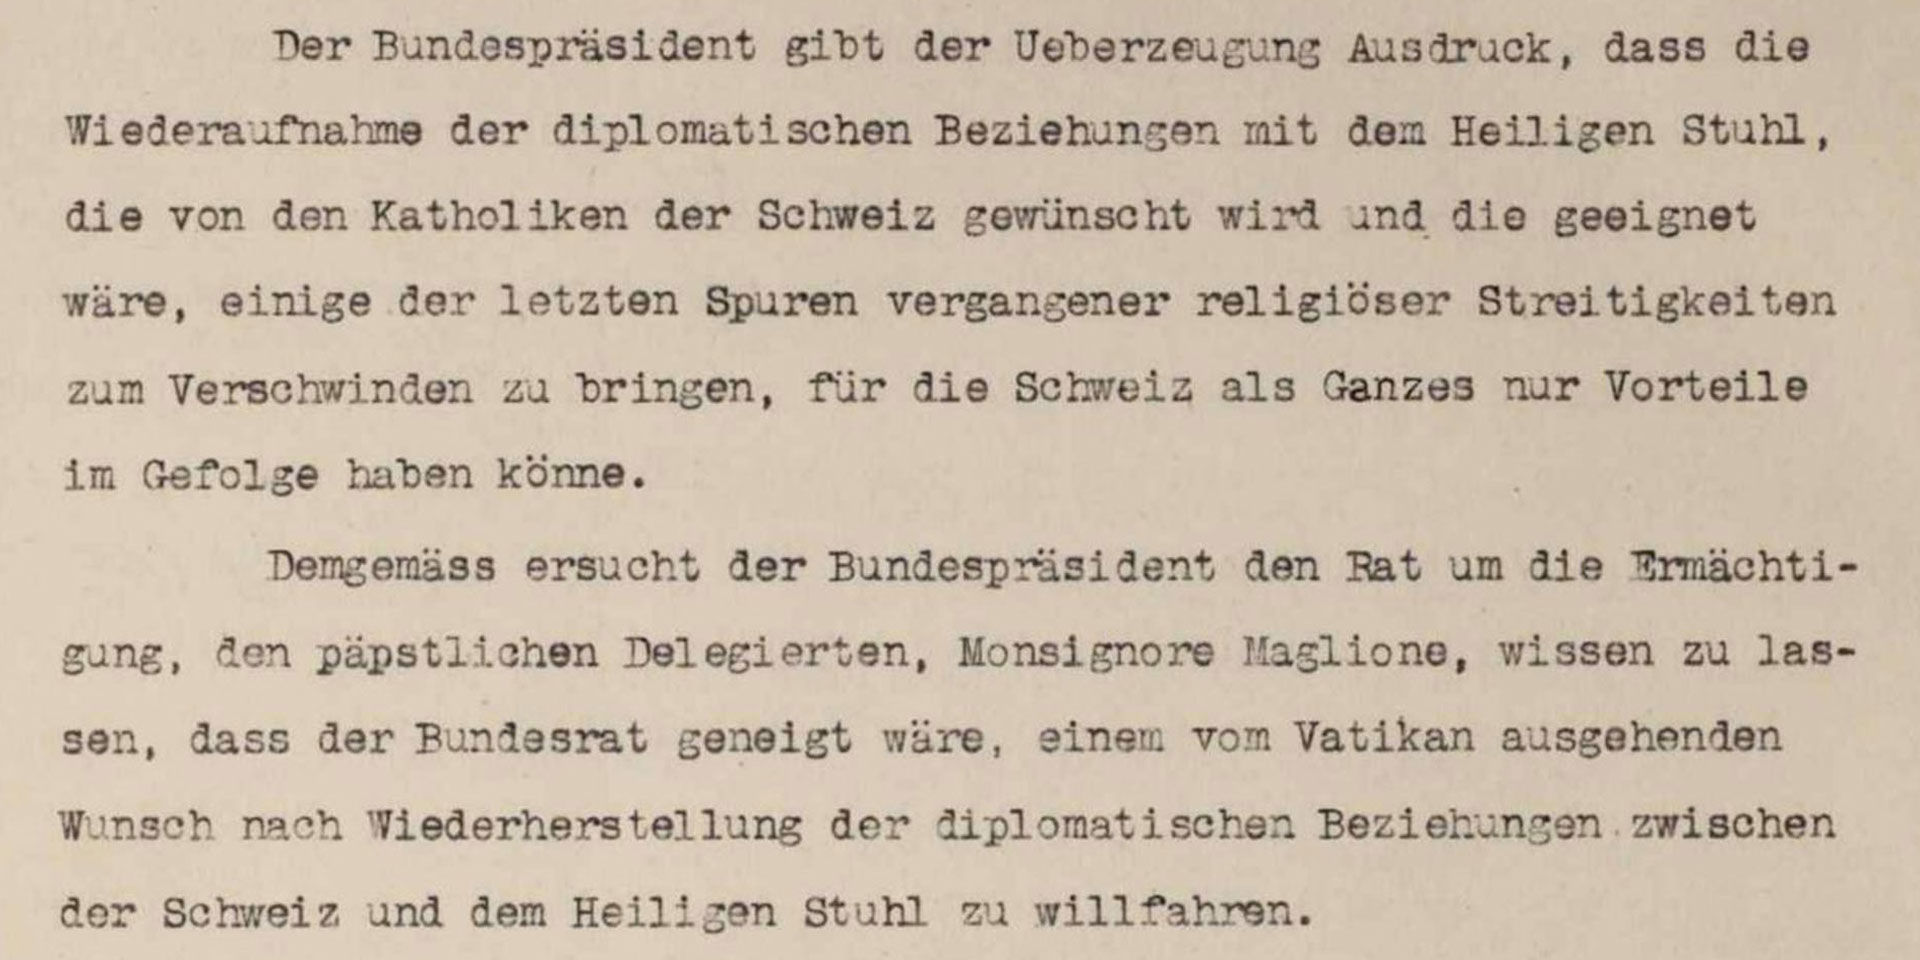 Excerpt from the minutes of the Federal Council meeting on 18 June 1920 regarding the proposal of Giuseppe Motta, President of the Swiss Confederation, to restore diplomatic relations with the Holy See.